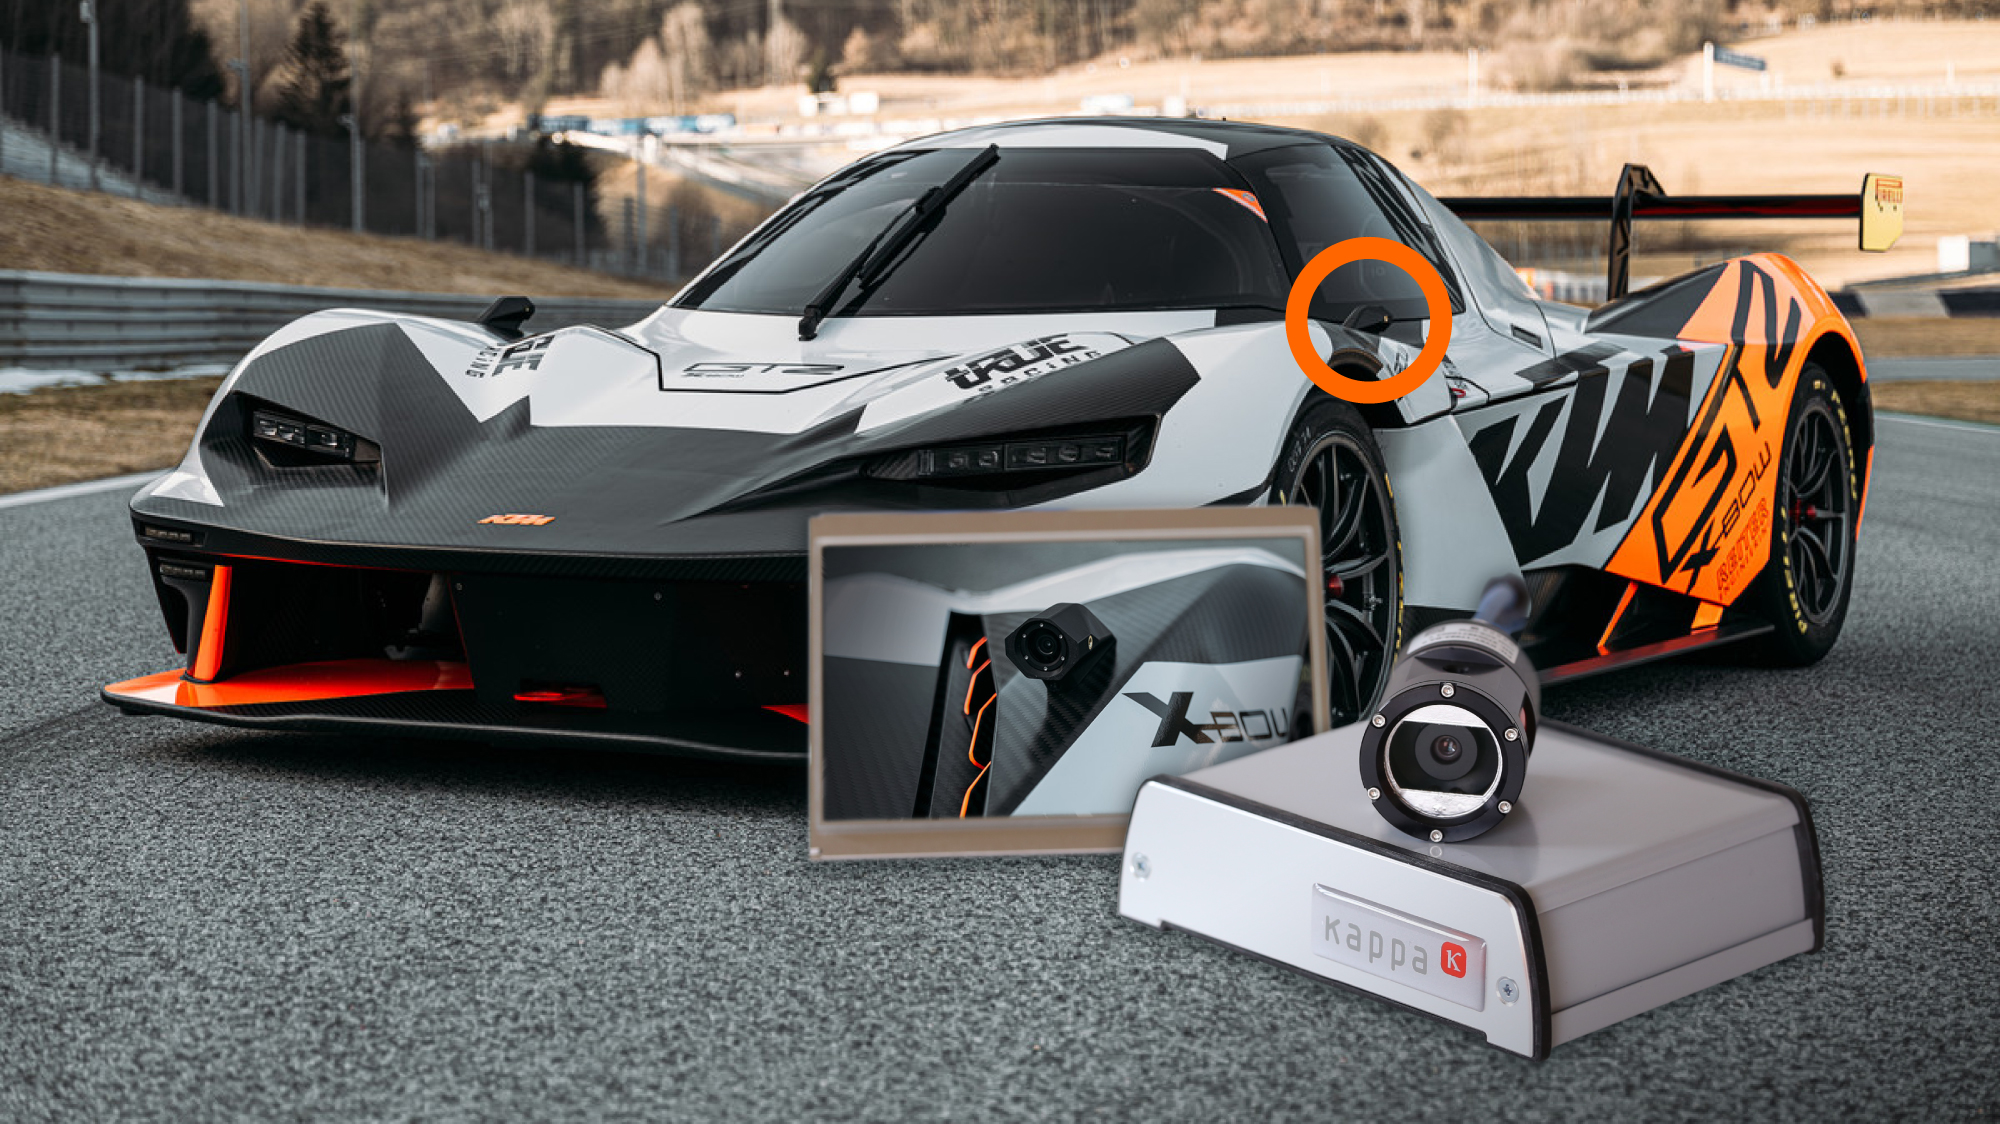 katolsk En smule Gurgle Innovative camera technology from Kappa optronics for KTM X-BOW super  sports cars: Camera & Vision Systems - application-specific & certified ✓  for Aviation, Defense & Automotive ✓ 40 years experience ▻ Get info now!